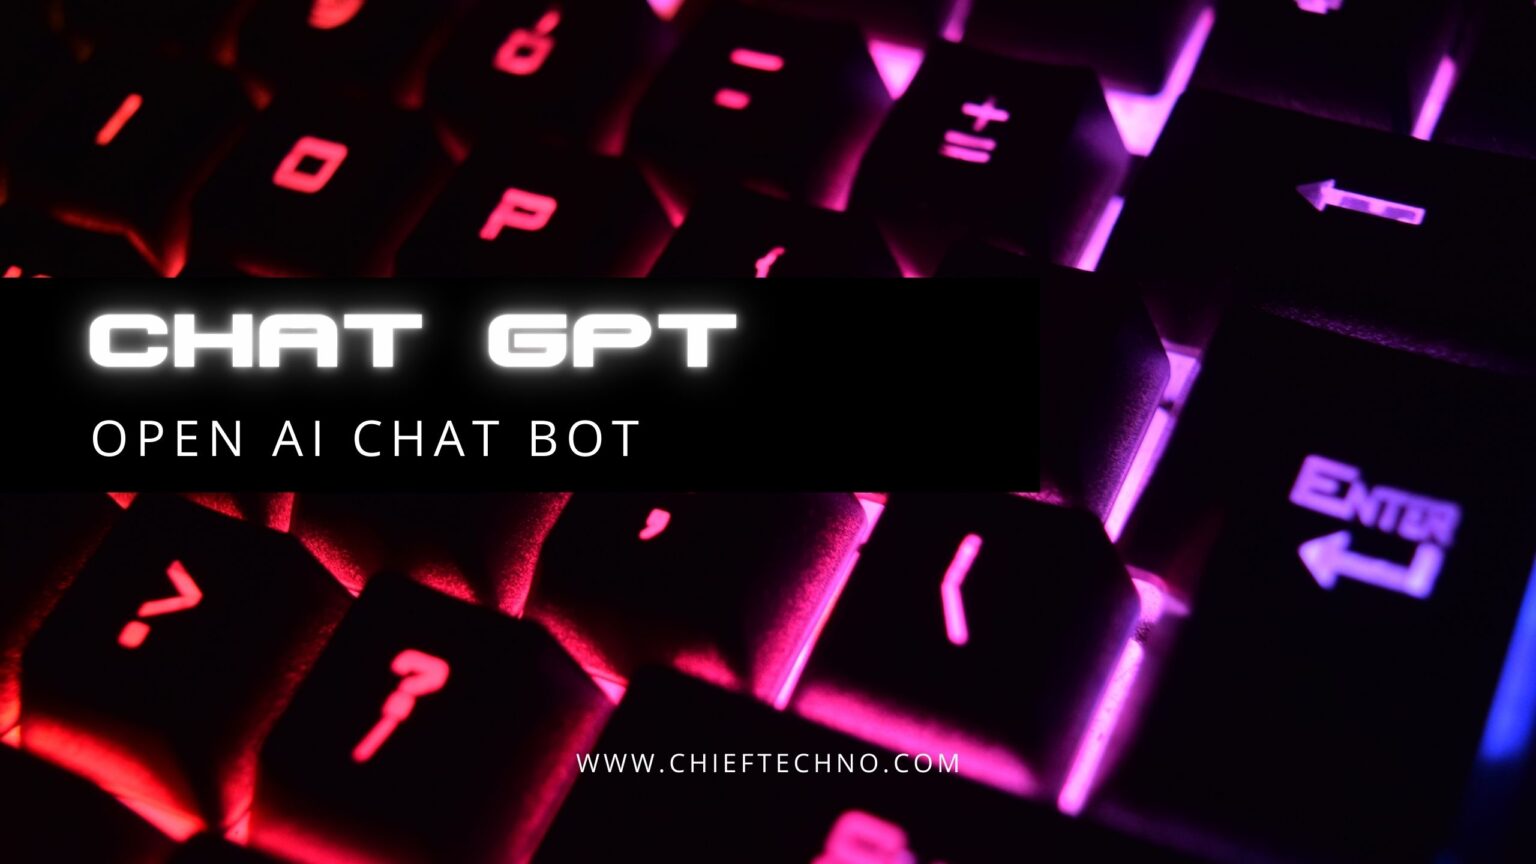 Chat GPT - Chat with AI安卓版应用APK下载